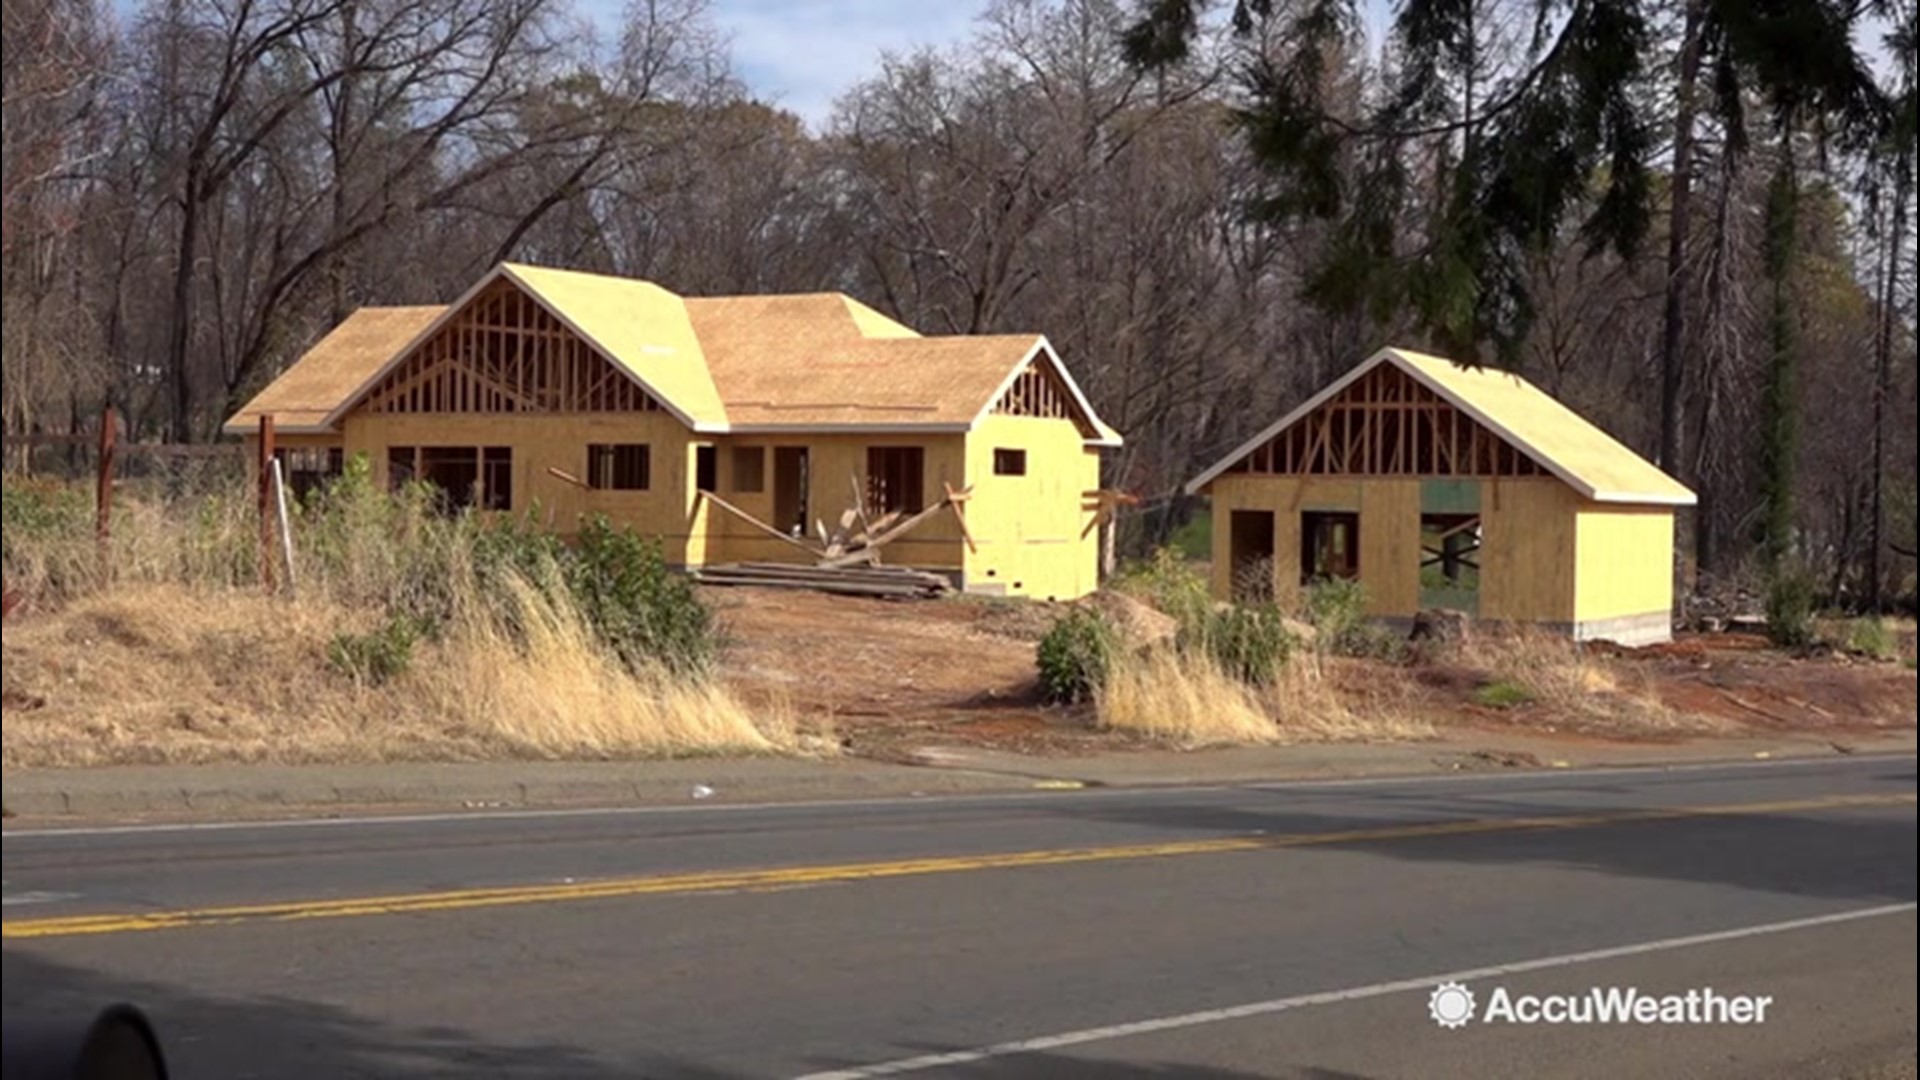 Hundreds of building permits are being filed in Paradise, California, as families try to rebuild after the deadly Camp Fire, but one expert is raising red flags about the plans.